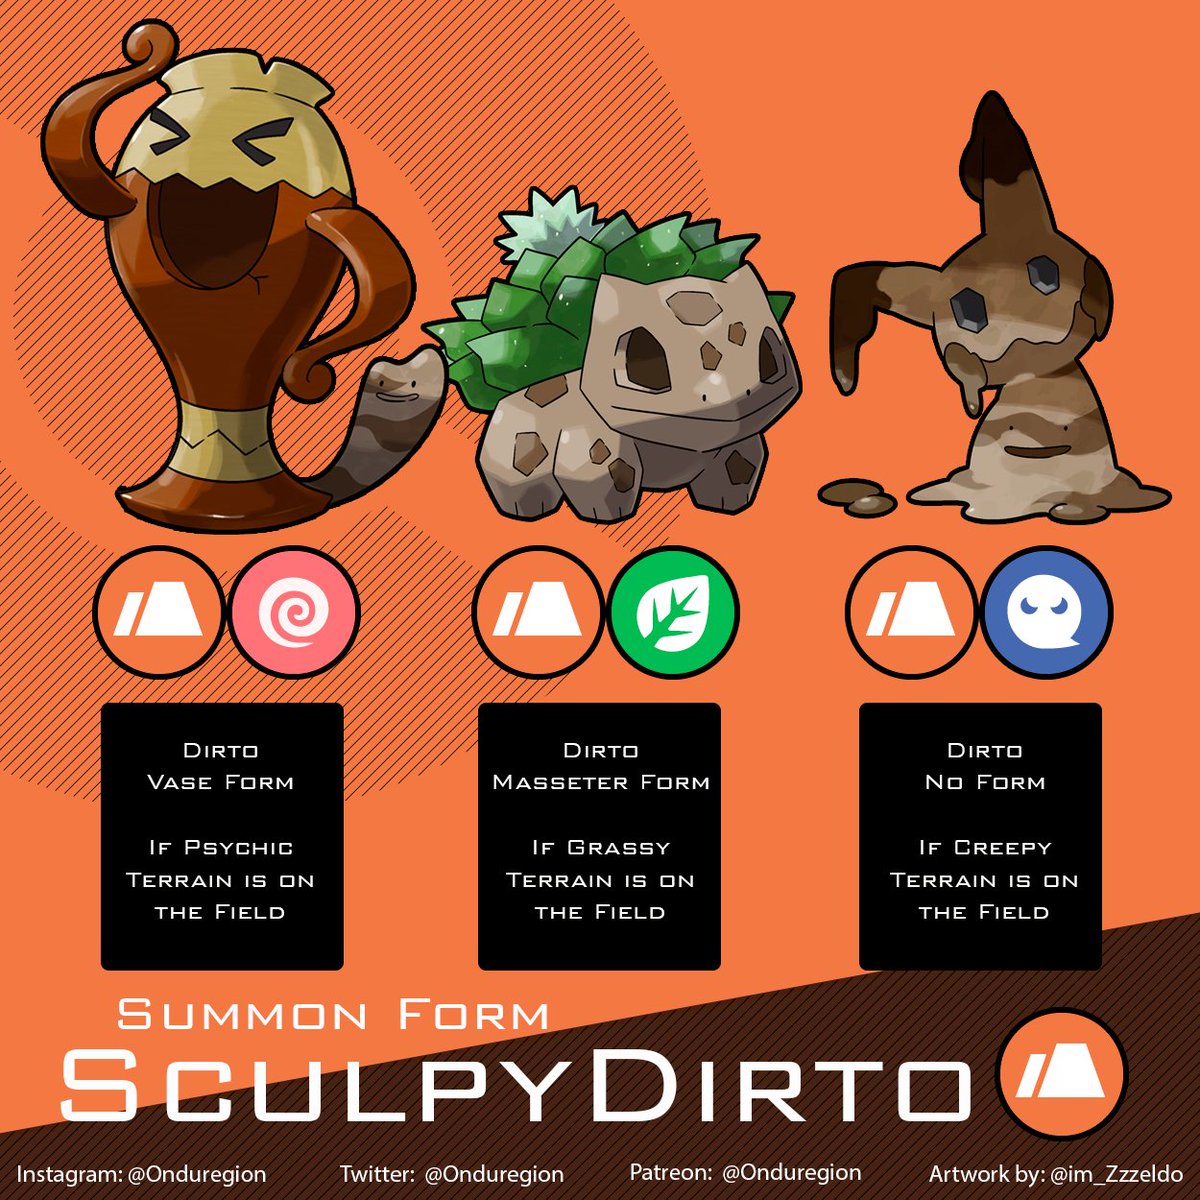 New convergent Form discovered in Ondu
   
 **Dirto Ground Type

Once executed, The Ritual move 'Clay Sculpting', Dirto will change Form, bringing changes to its stats and a new set of attacks.

 #PokemonUNITE #PokemonScarletViolet #paradoxpokemon #art